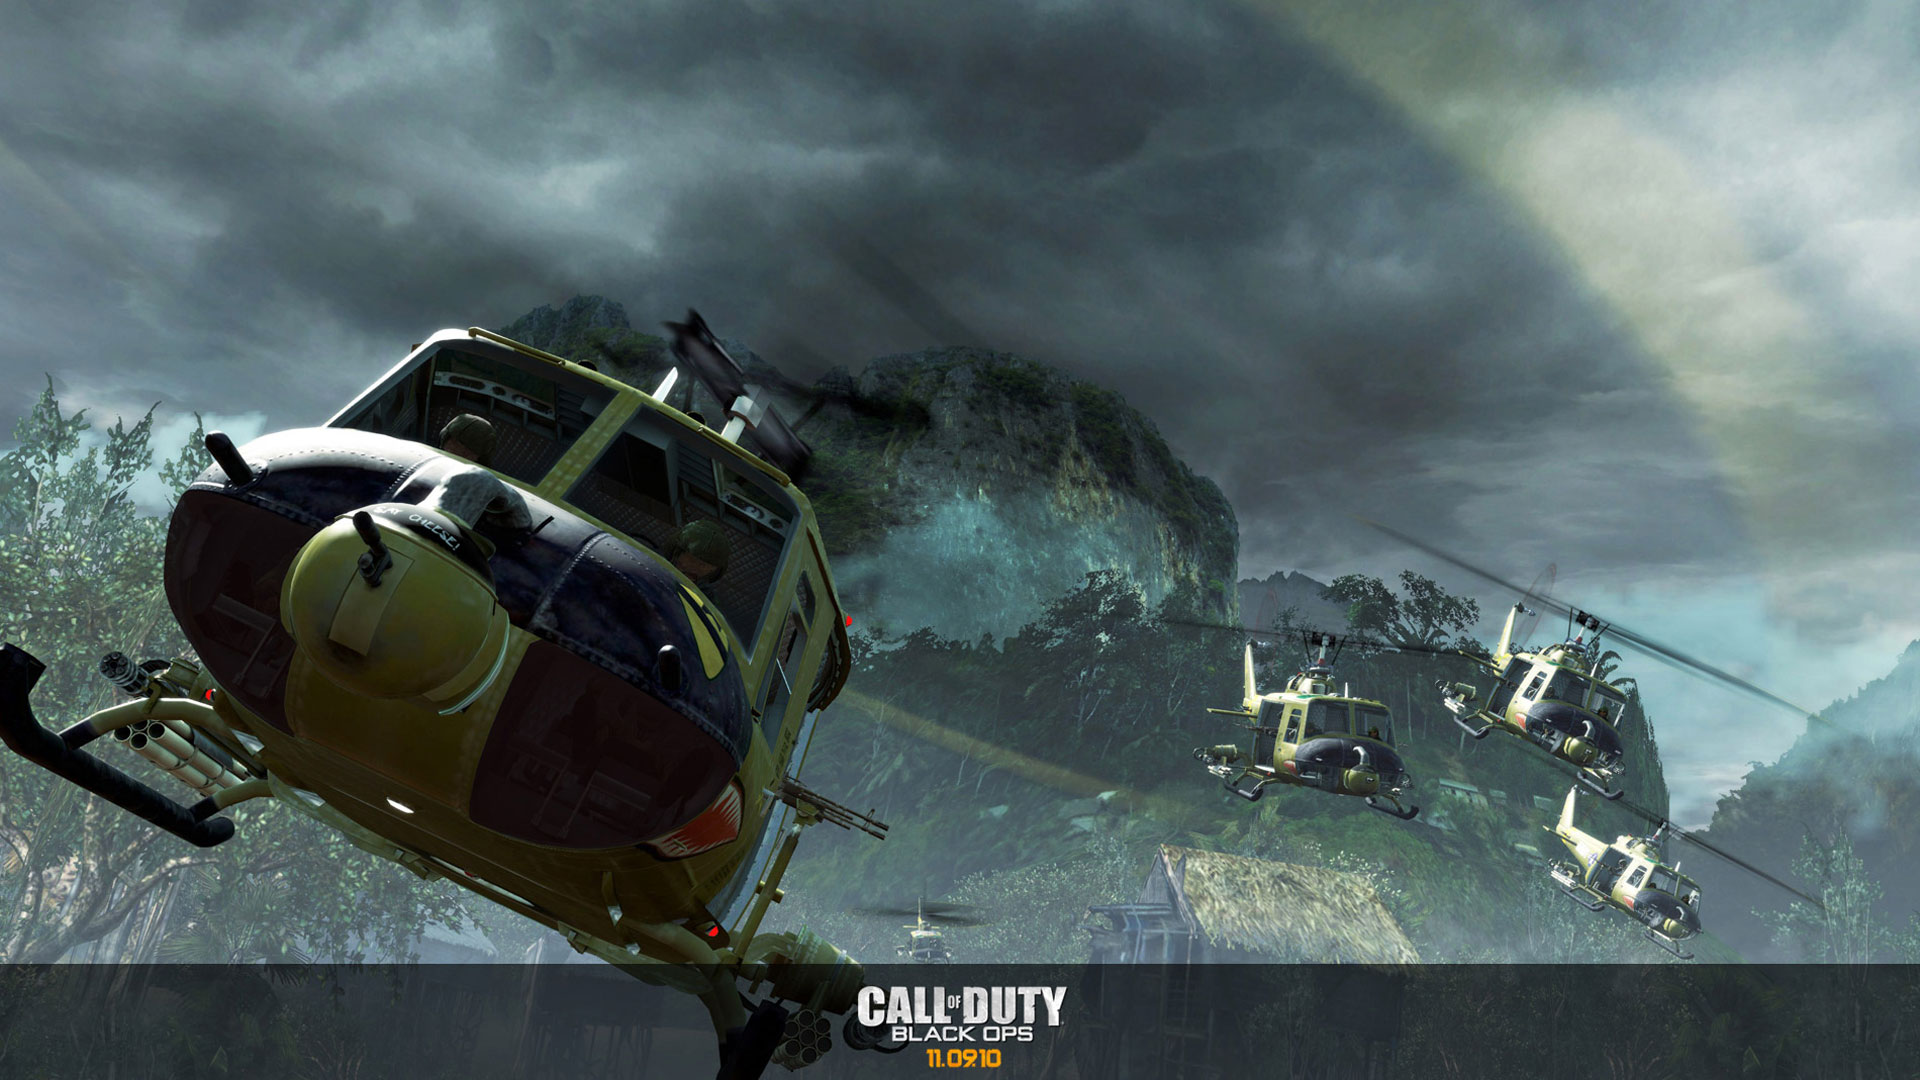 call, Of, Duty, Call, Of, Duty , Black, Ops Wallpaper